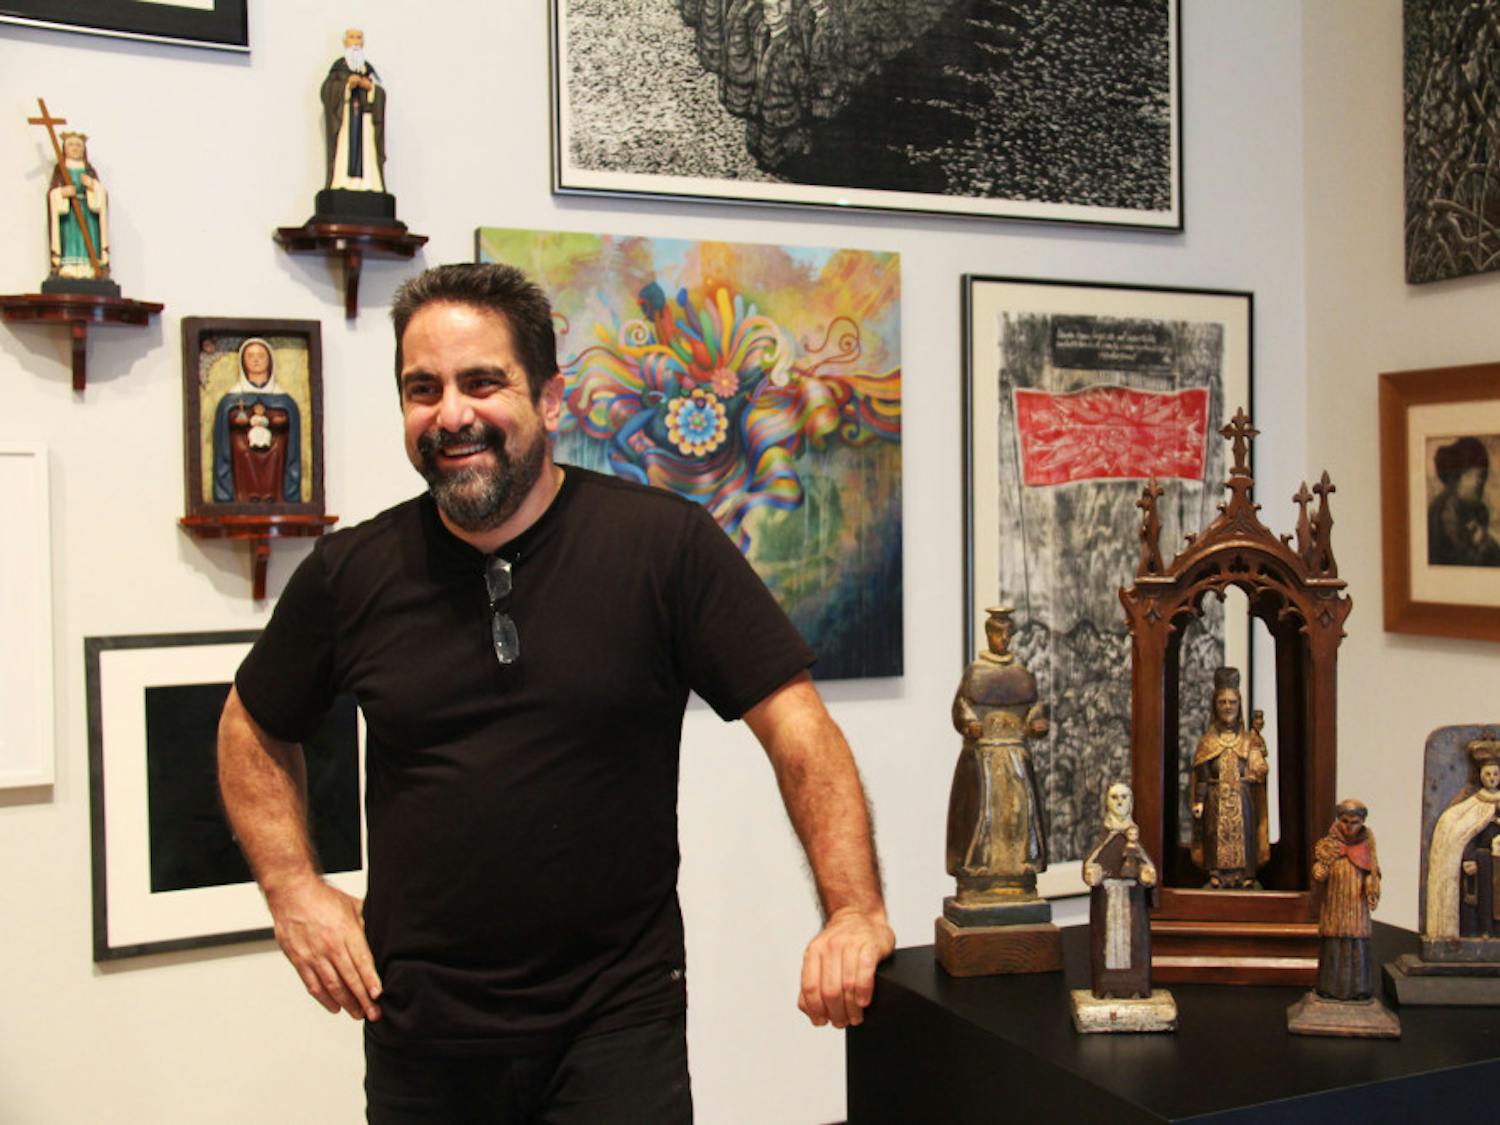 Hector Puig stands with some of the pieces of his collection in the University Gallery.